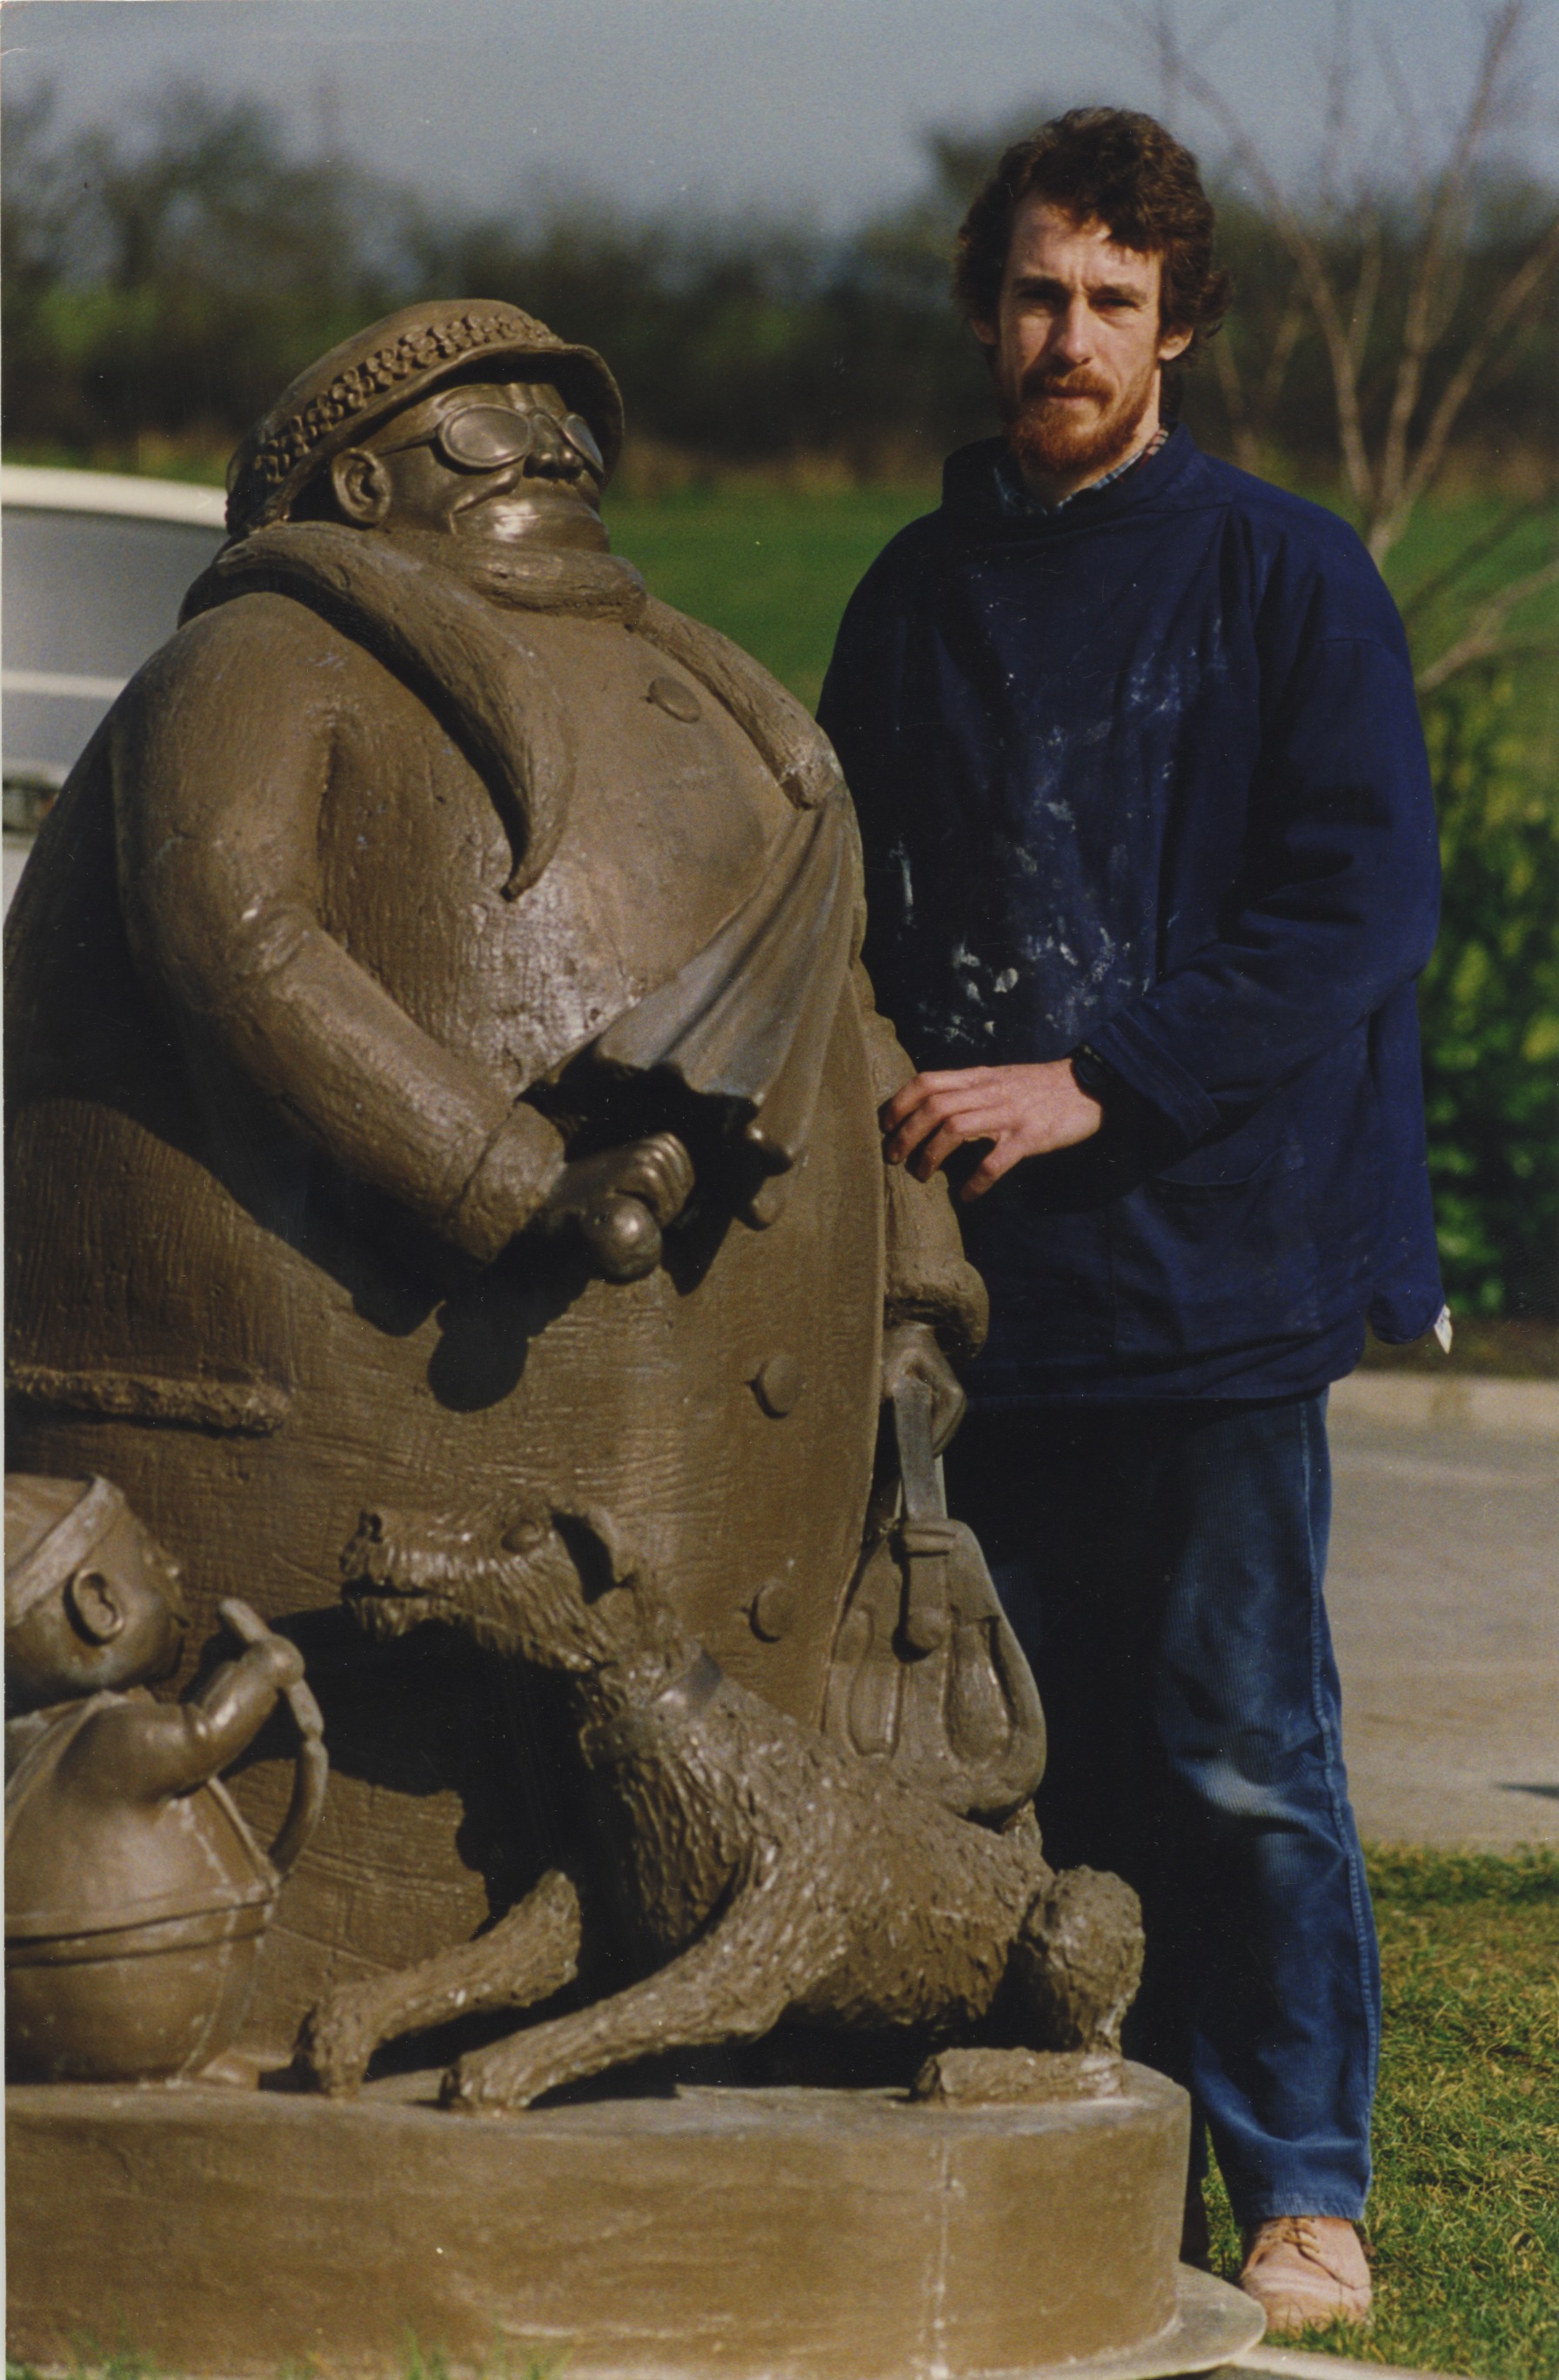 Colour photo of Grandma statue with sculptor Miles Robinson - East Anglian Daily Times, September 1993 (Image ref: GAR-F-S-460-2)